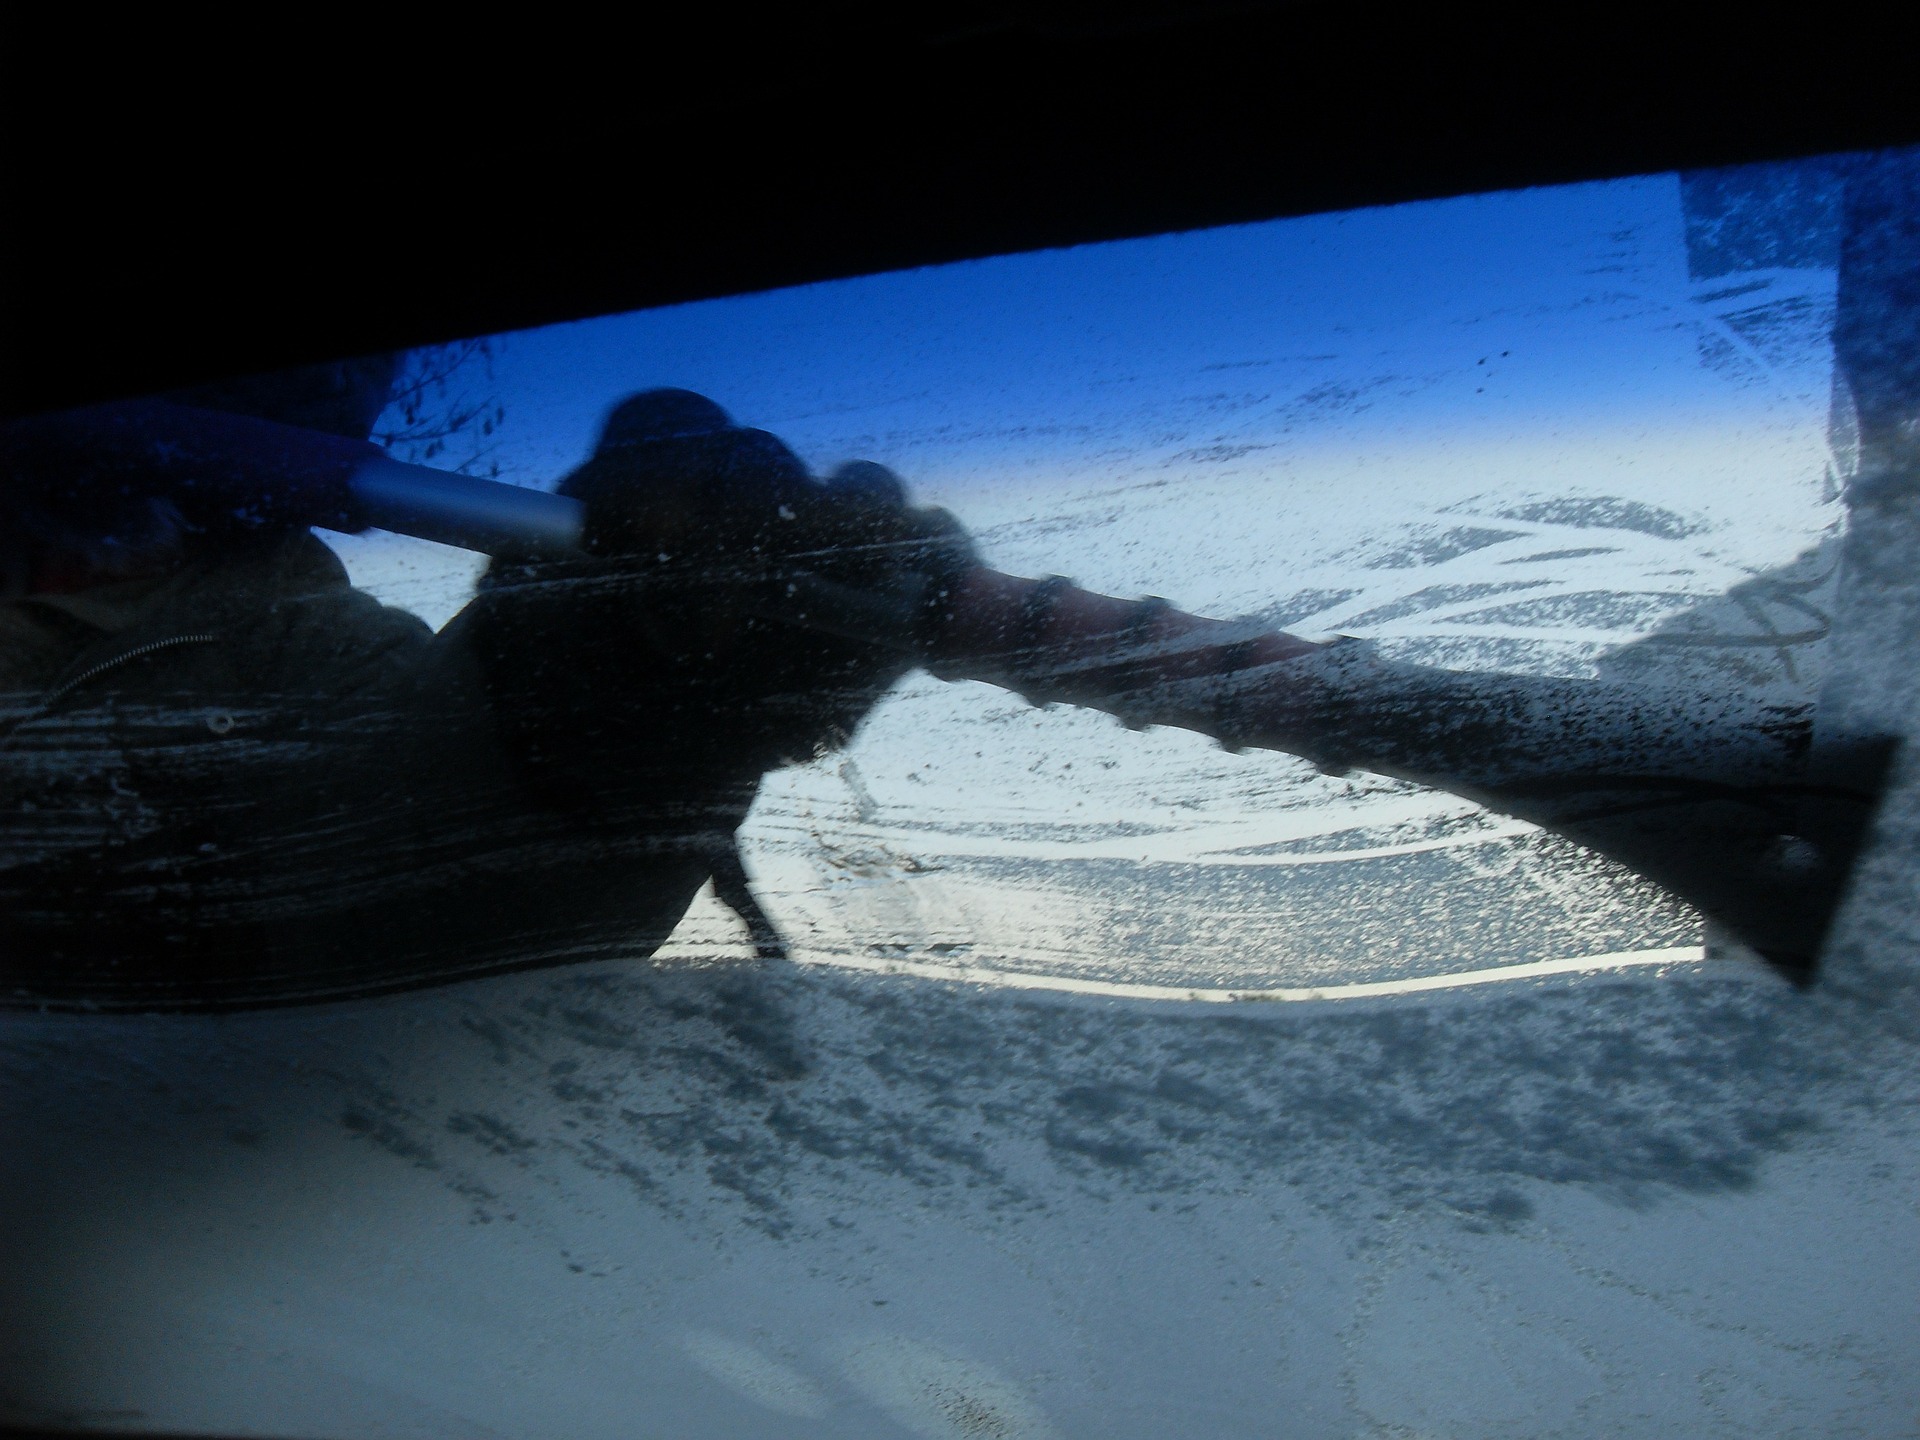 A person scraping ice off the windshield of a car from the outside, viewed from the interior of the vehicle. The image captures the gloved hand of the person holding a scraper and making sweeping motions to clear the frosty glass. 